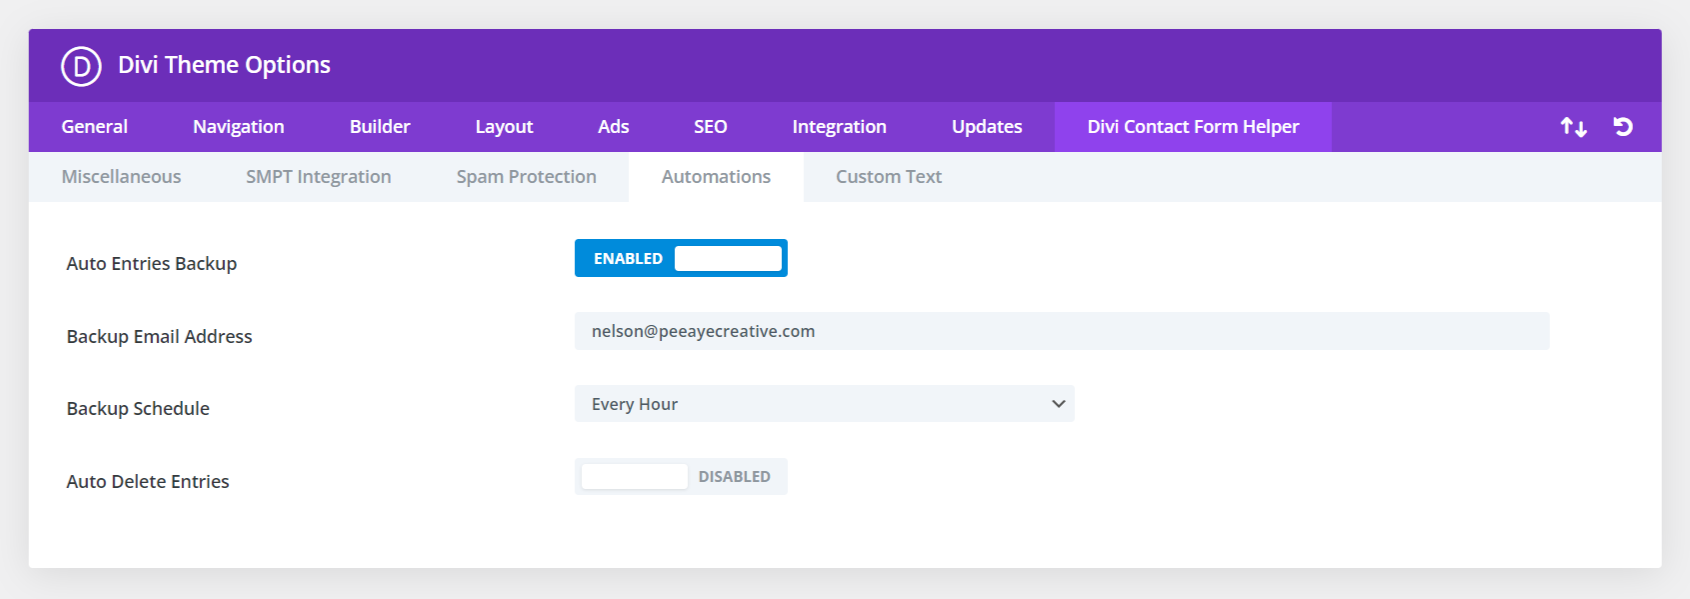 auto backup entries in the Divi Contact Form Helper Plugin by Pee Aye Creative